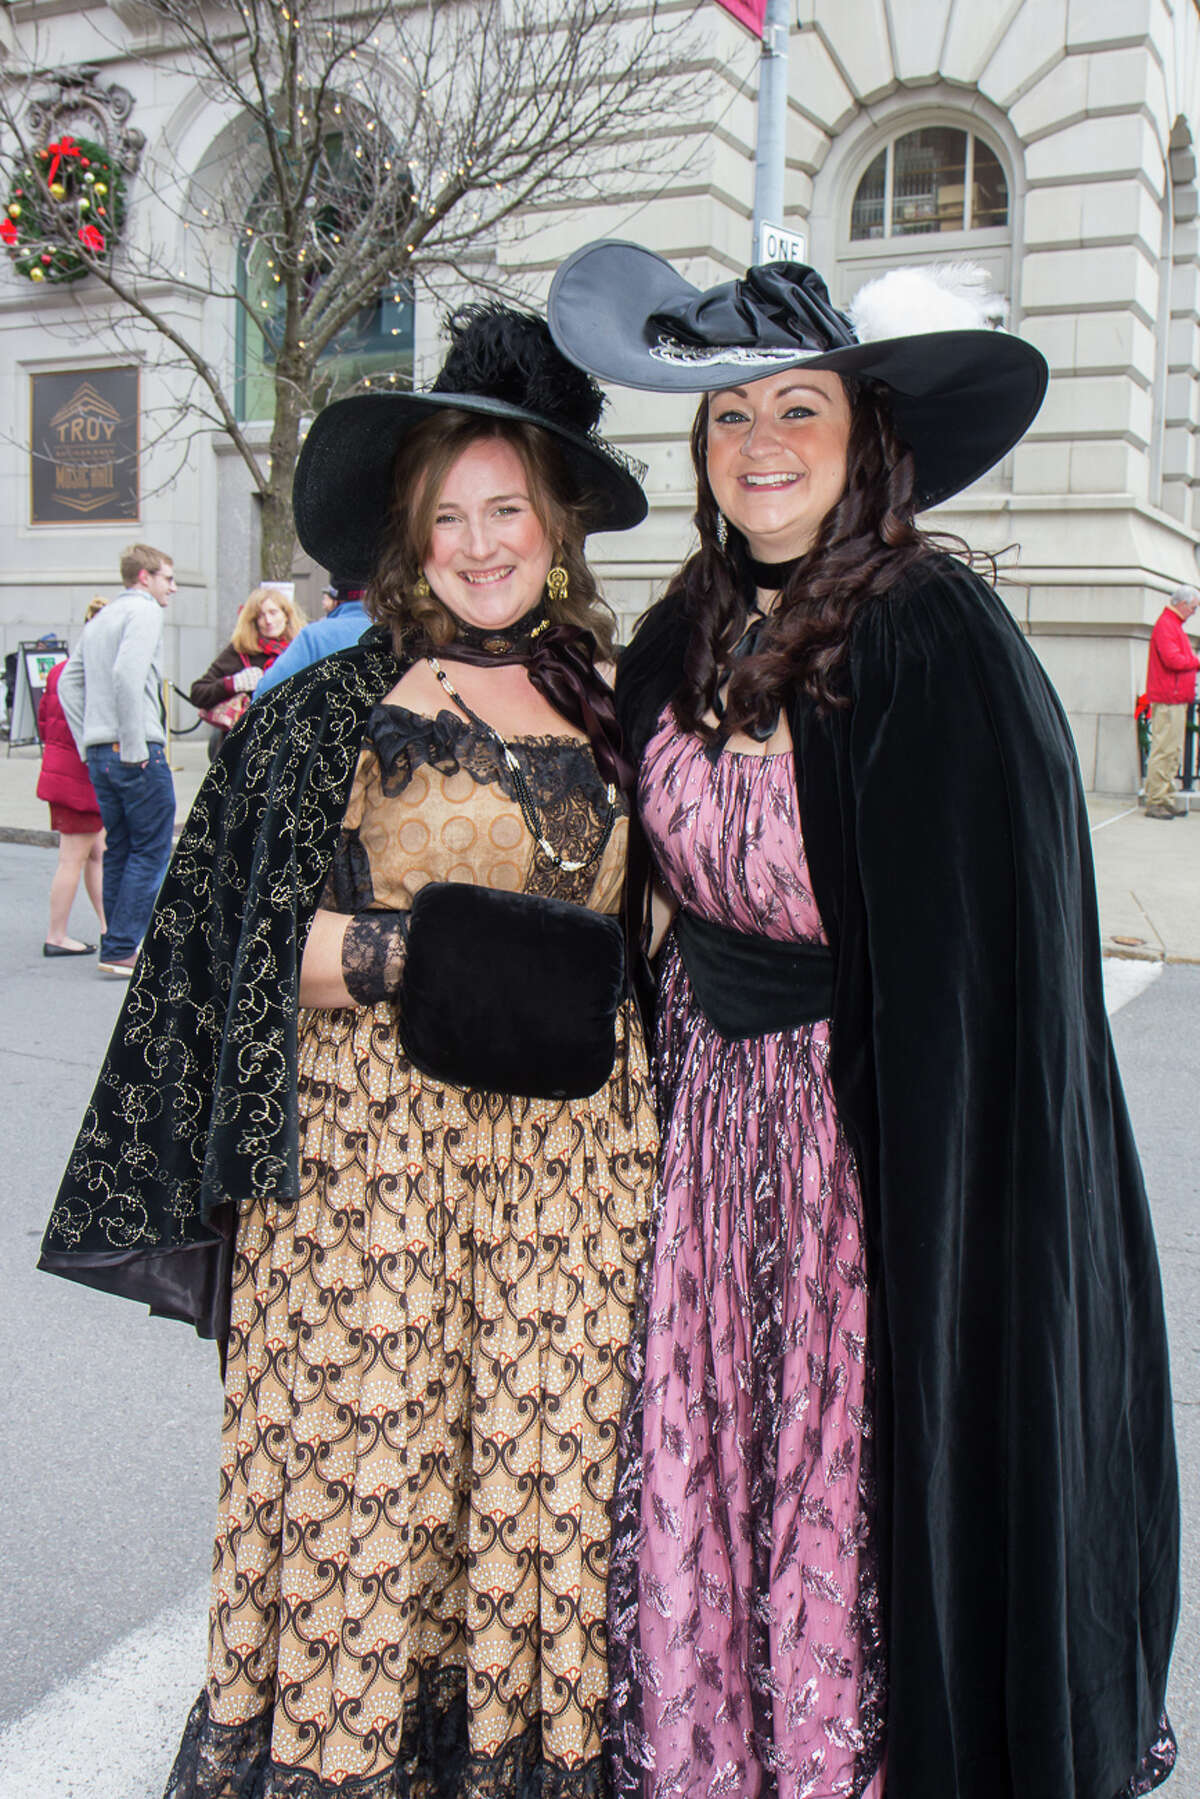 The 36th Annual Troy Victorian Stroll will be held Sunday in downtown Troy. Learn more.